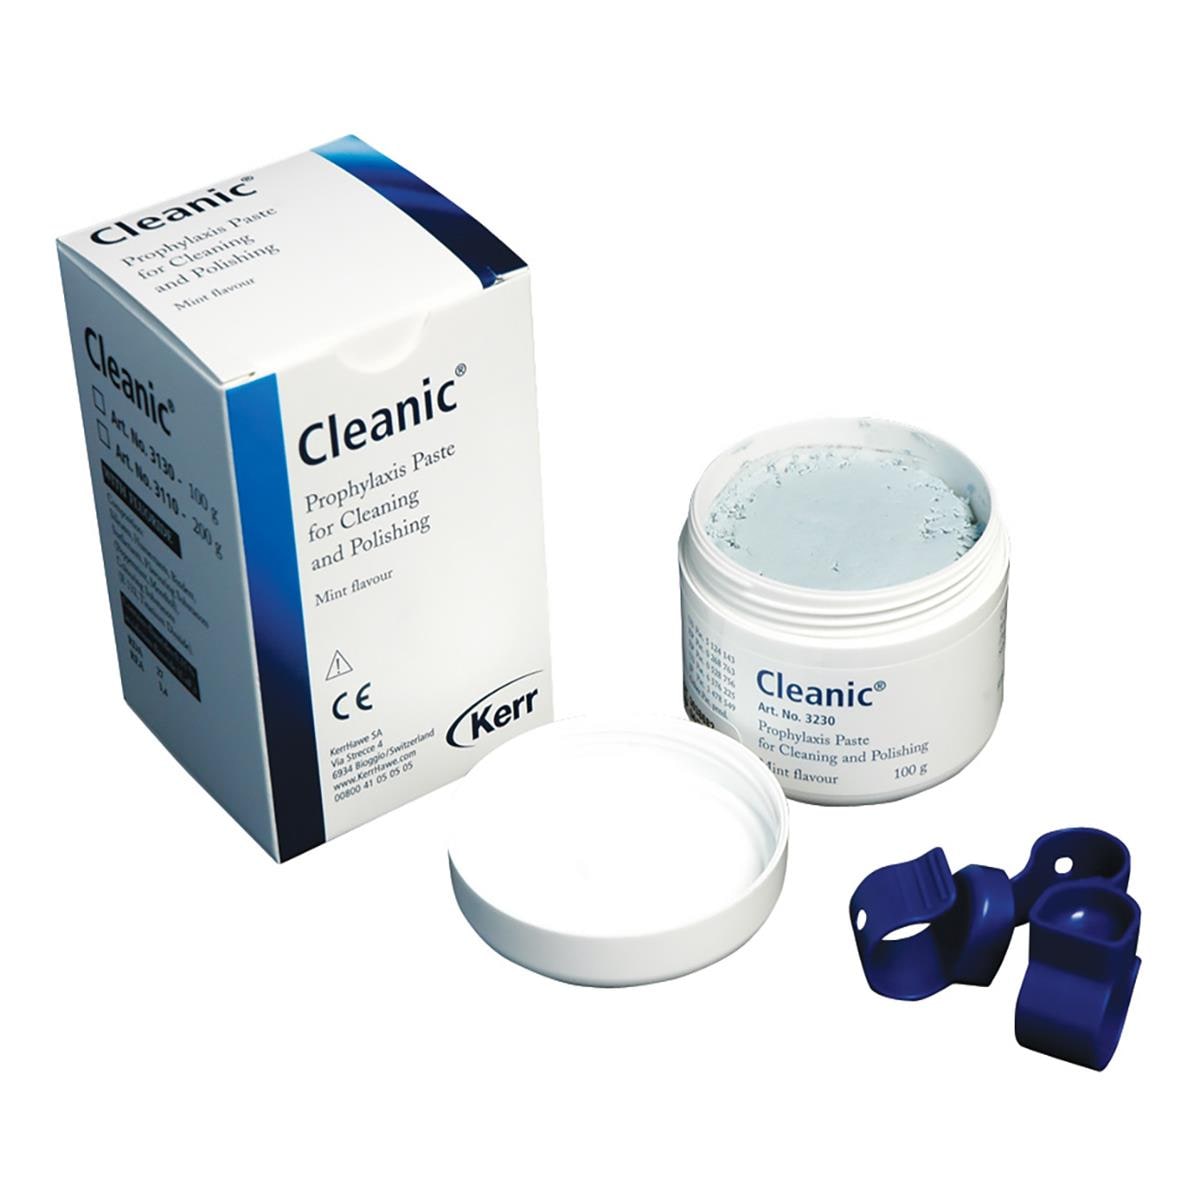 Cleanic Prophy Paste Test Refill 100g